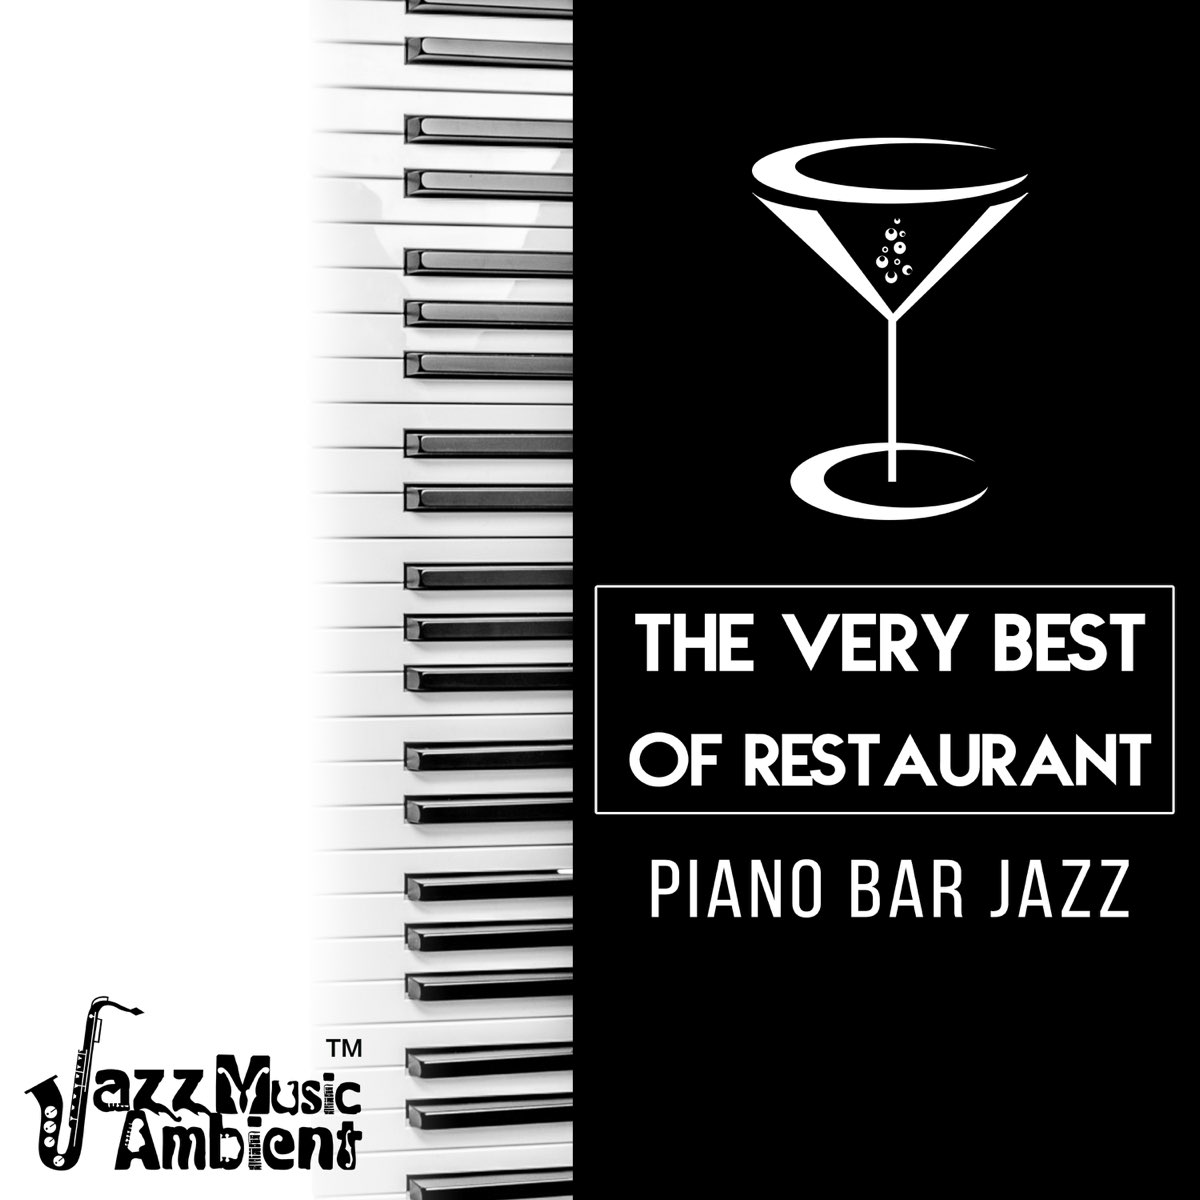 The Very Best of Restaurant Piano Bar Jazz: Mellow Piano Jazz Background  for Dinner Party, Relaxing Cafe Bar Lounge & Coffee Shop by Instrumental  Jazz Music Ambient on Apple Music